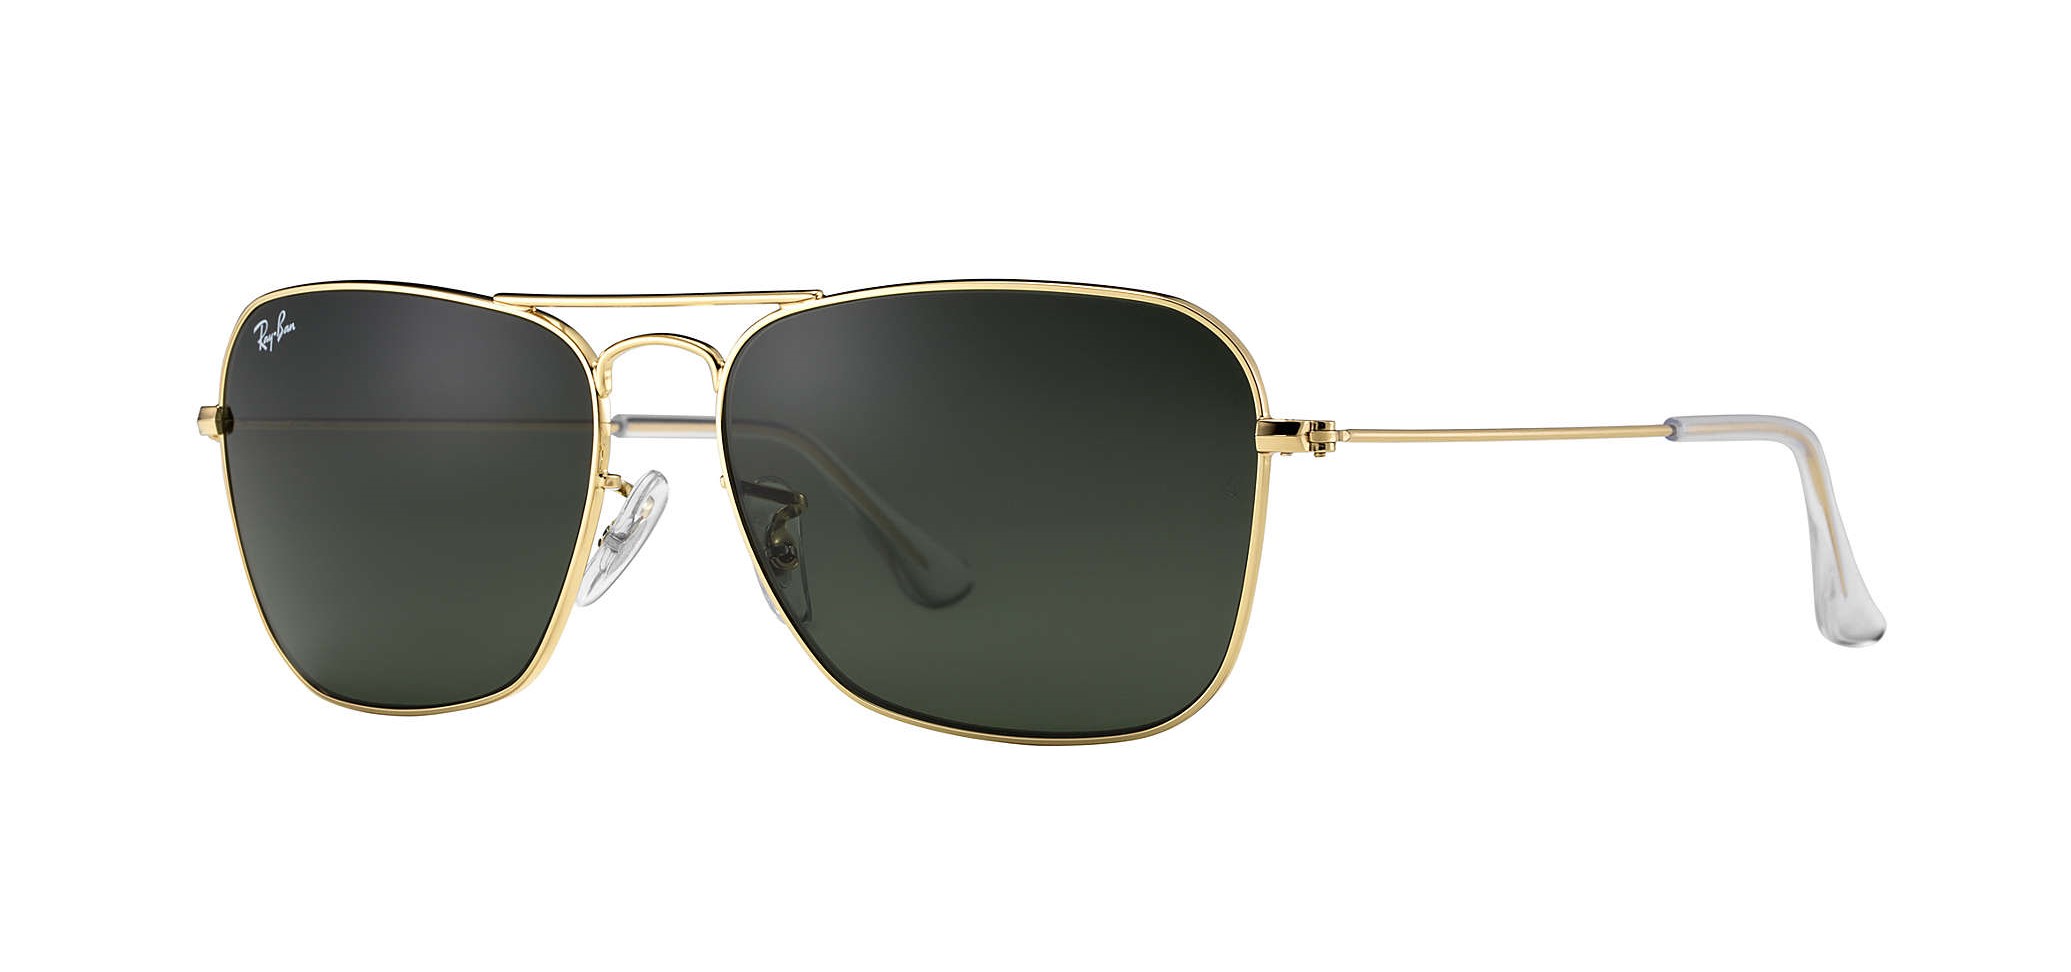 Ray-Ban RB3136 Caravan Sunglasses Gold Metal Frame with Crystal Green G-15 Lenses and Clear Temple Tips